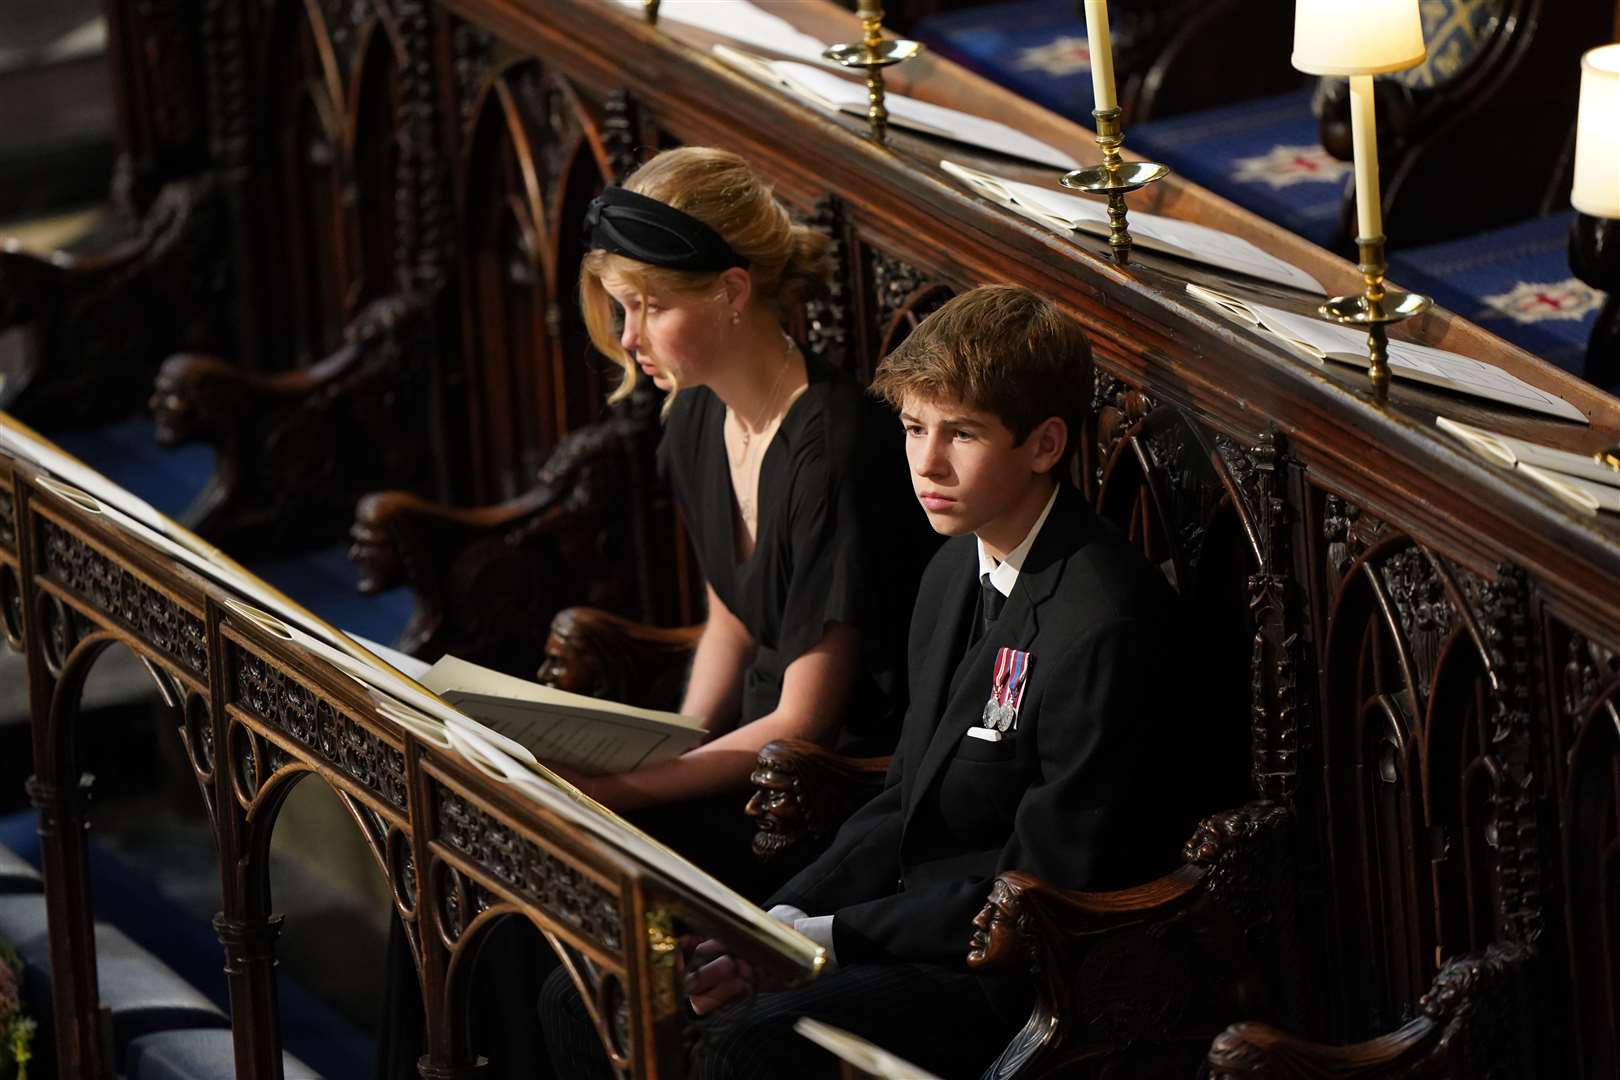 Lady Louise Windsor and James, Viscount Severn at the committal service (Joe Giddens/PA)